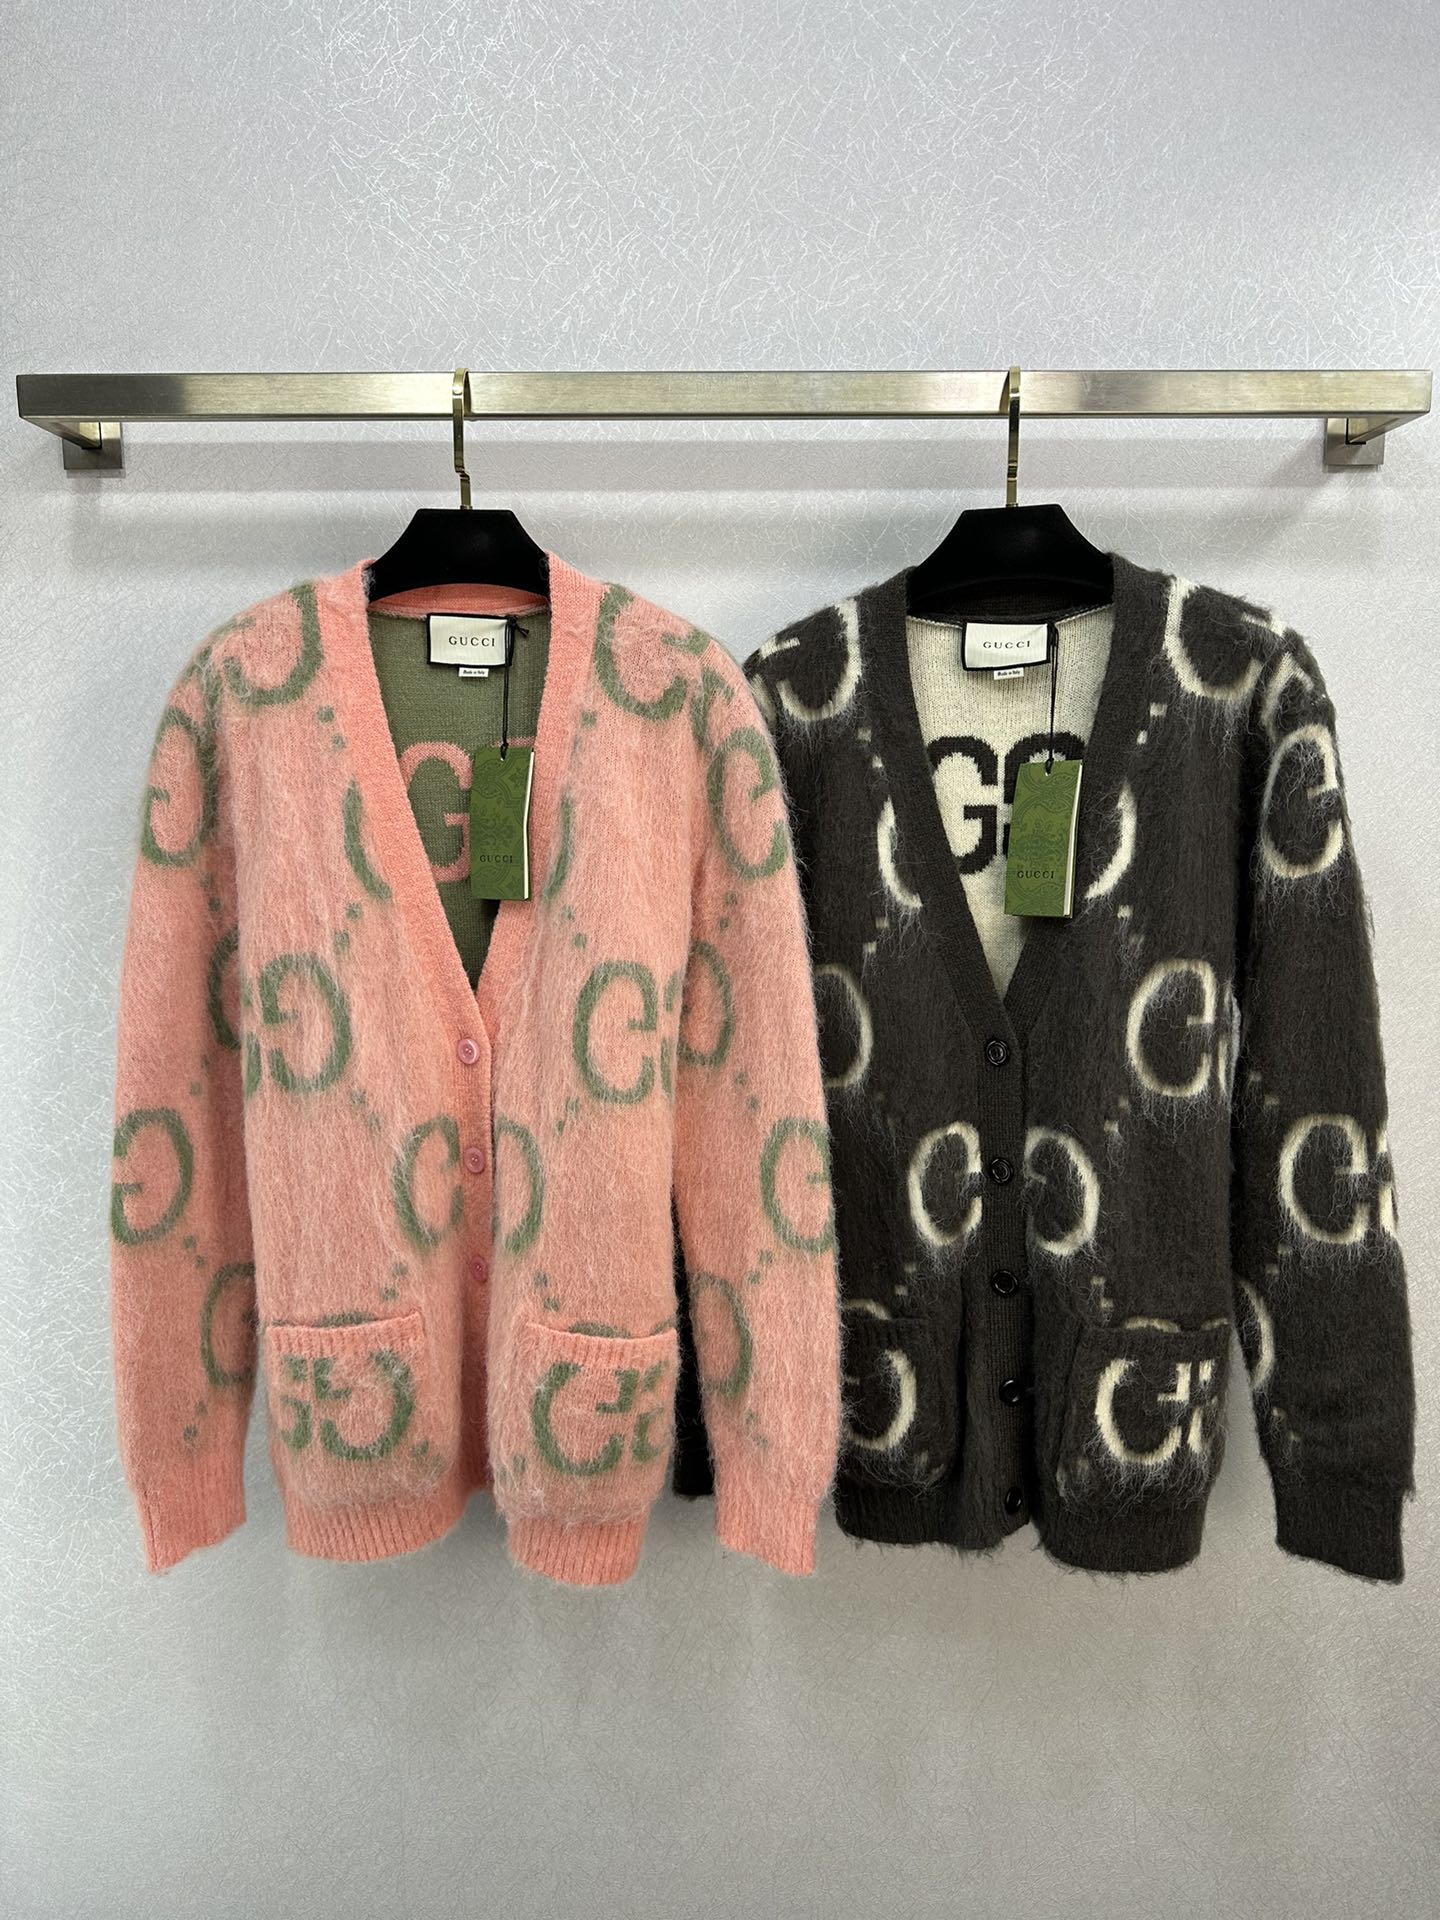 Gucci Clothing Cardigans Knit Sweater Knitting Fall/Winter Collection